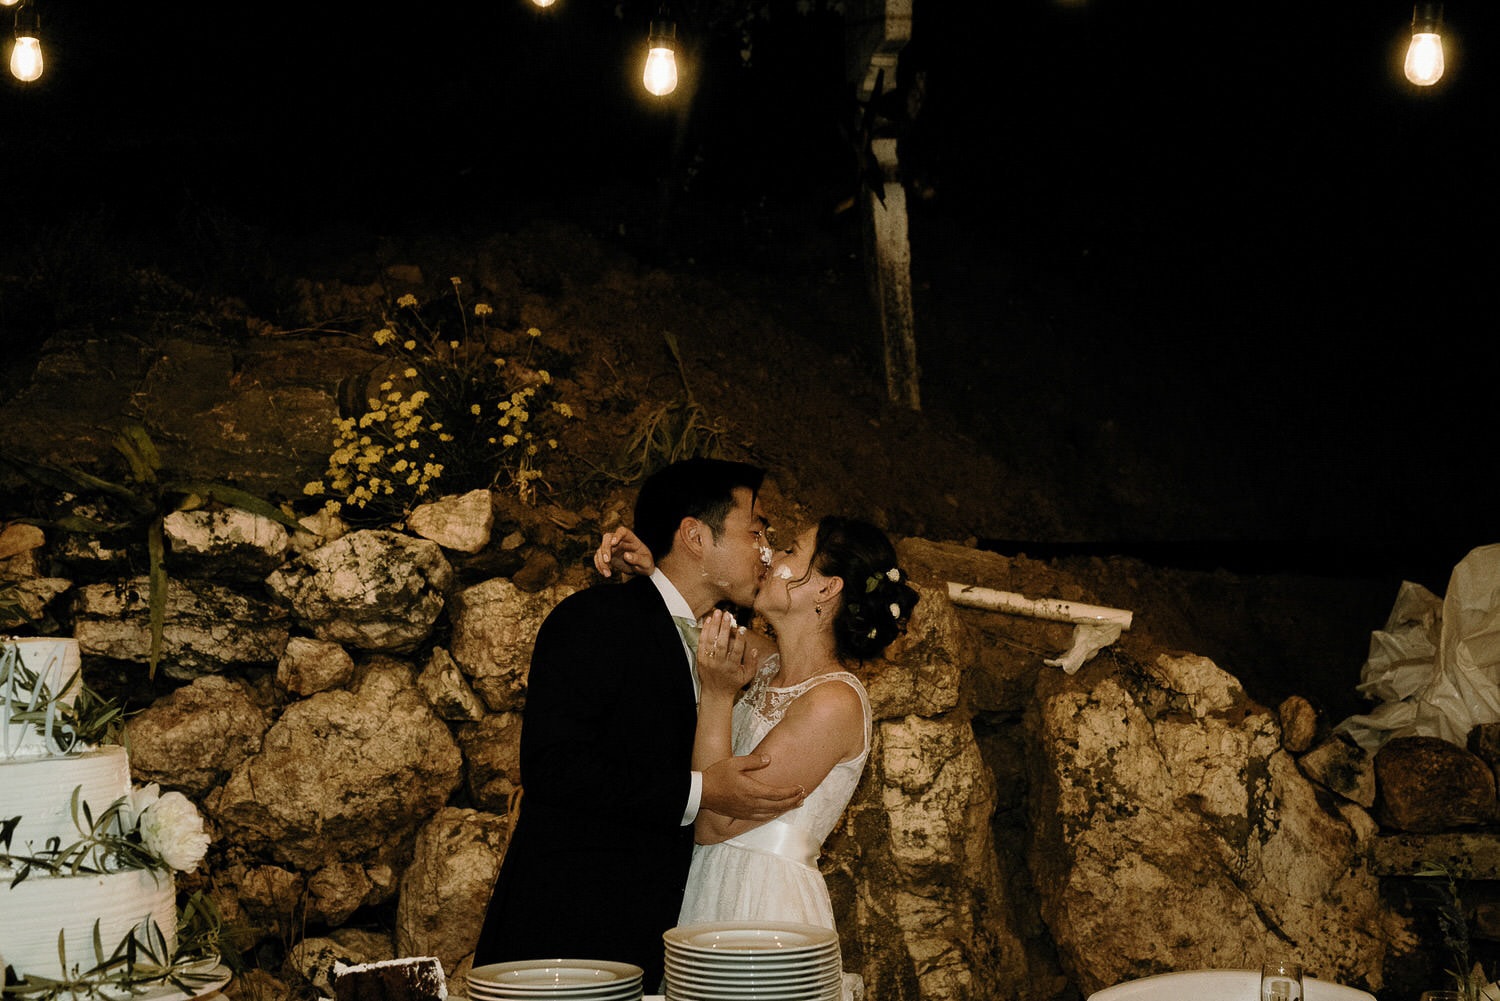 Charming Destination Wedding in the Portuguese Countryside - bride and groom sharing a dirty kiss after putting cake on their faces